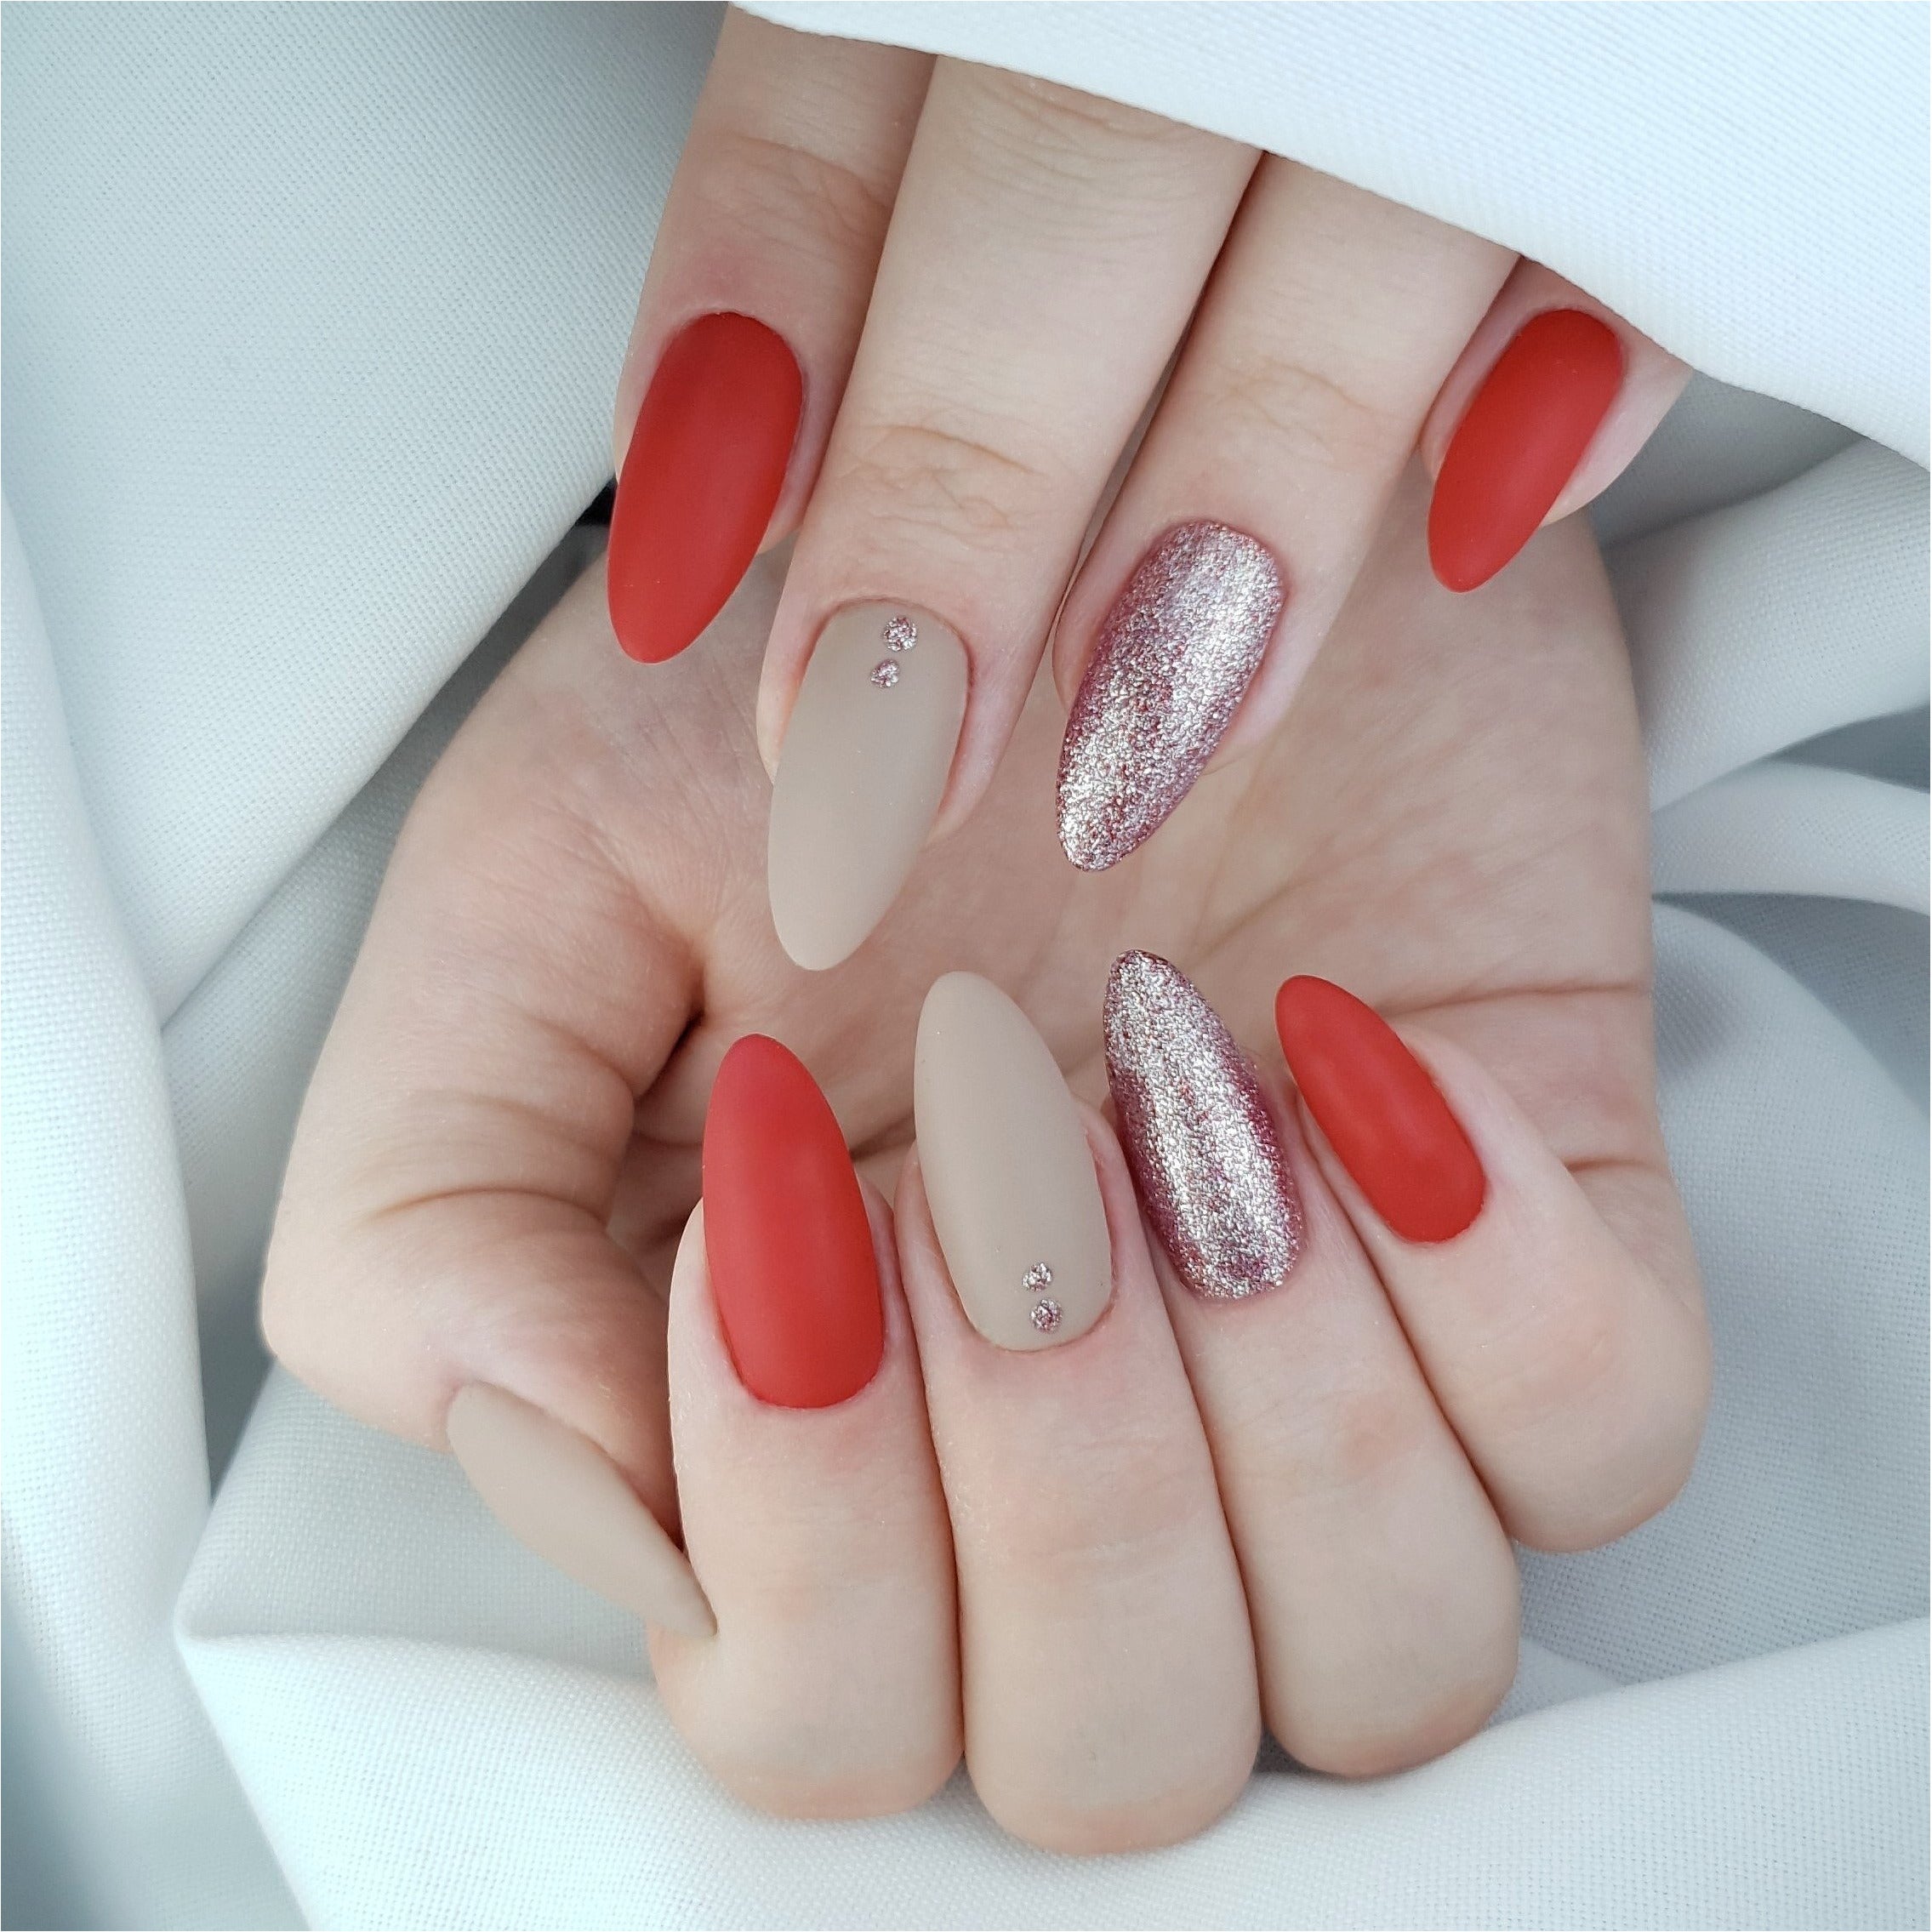 Check Out Venalissa UV Gel Polish Set At Unbelievable Prices From ILMP